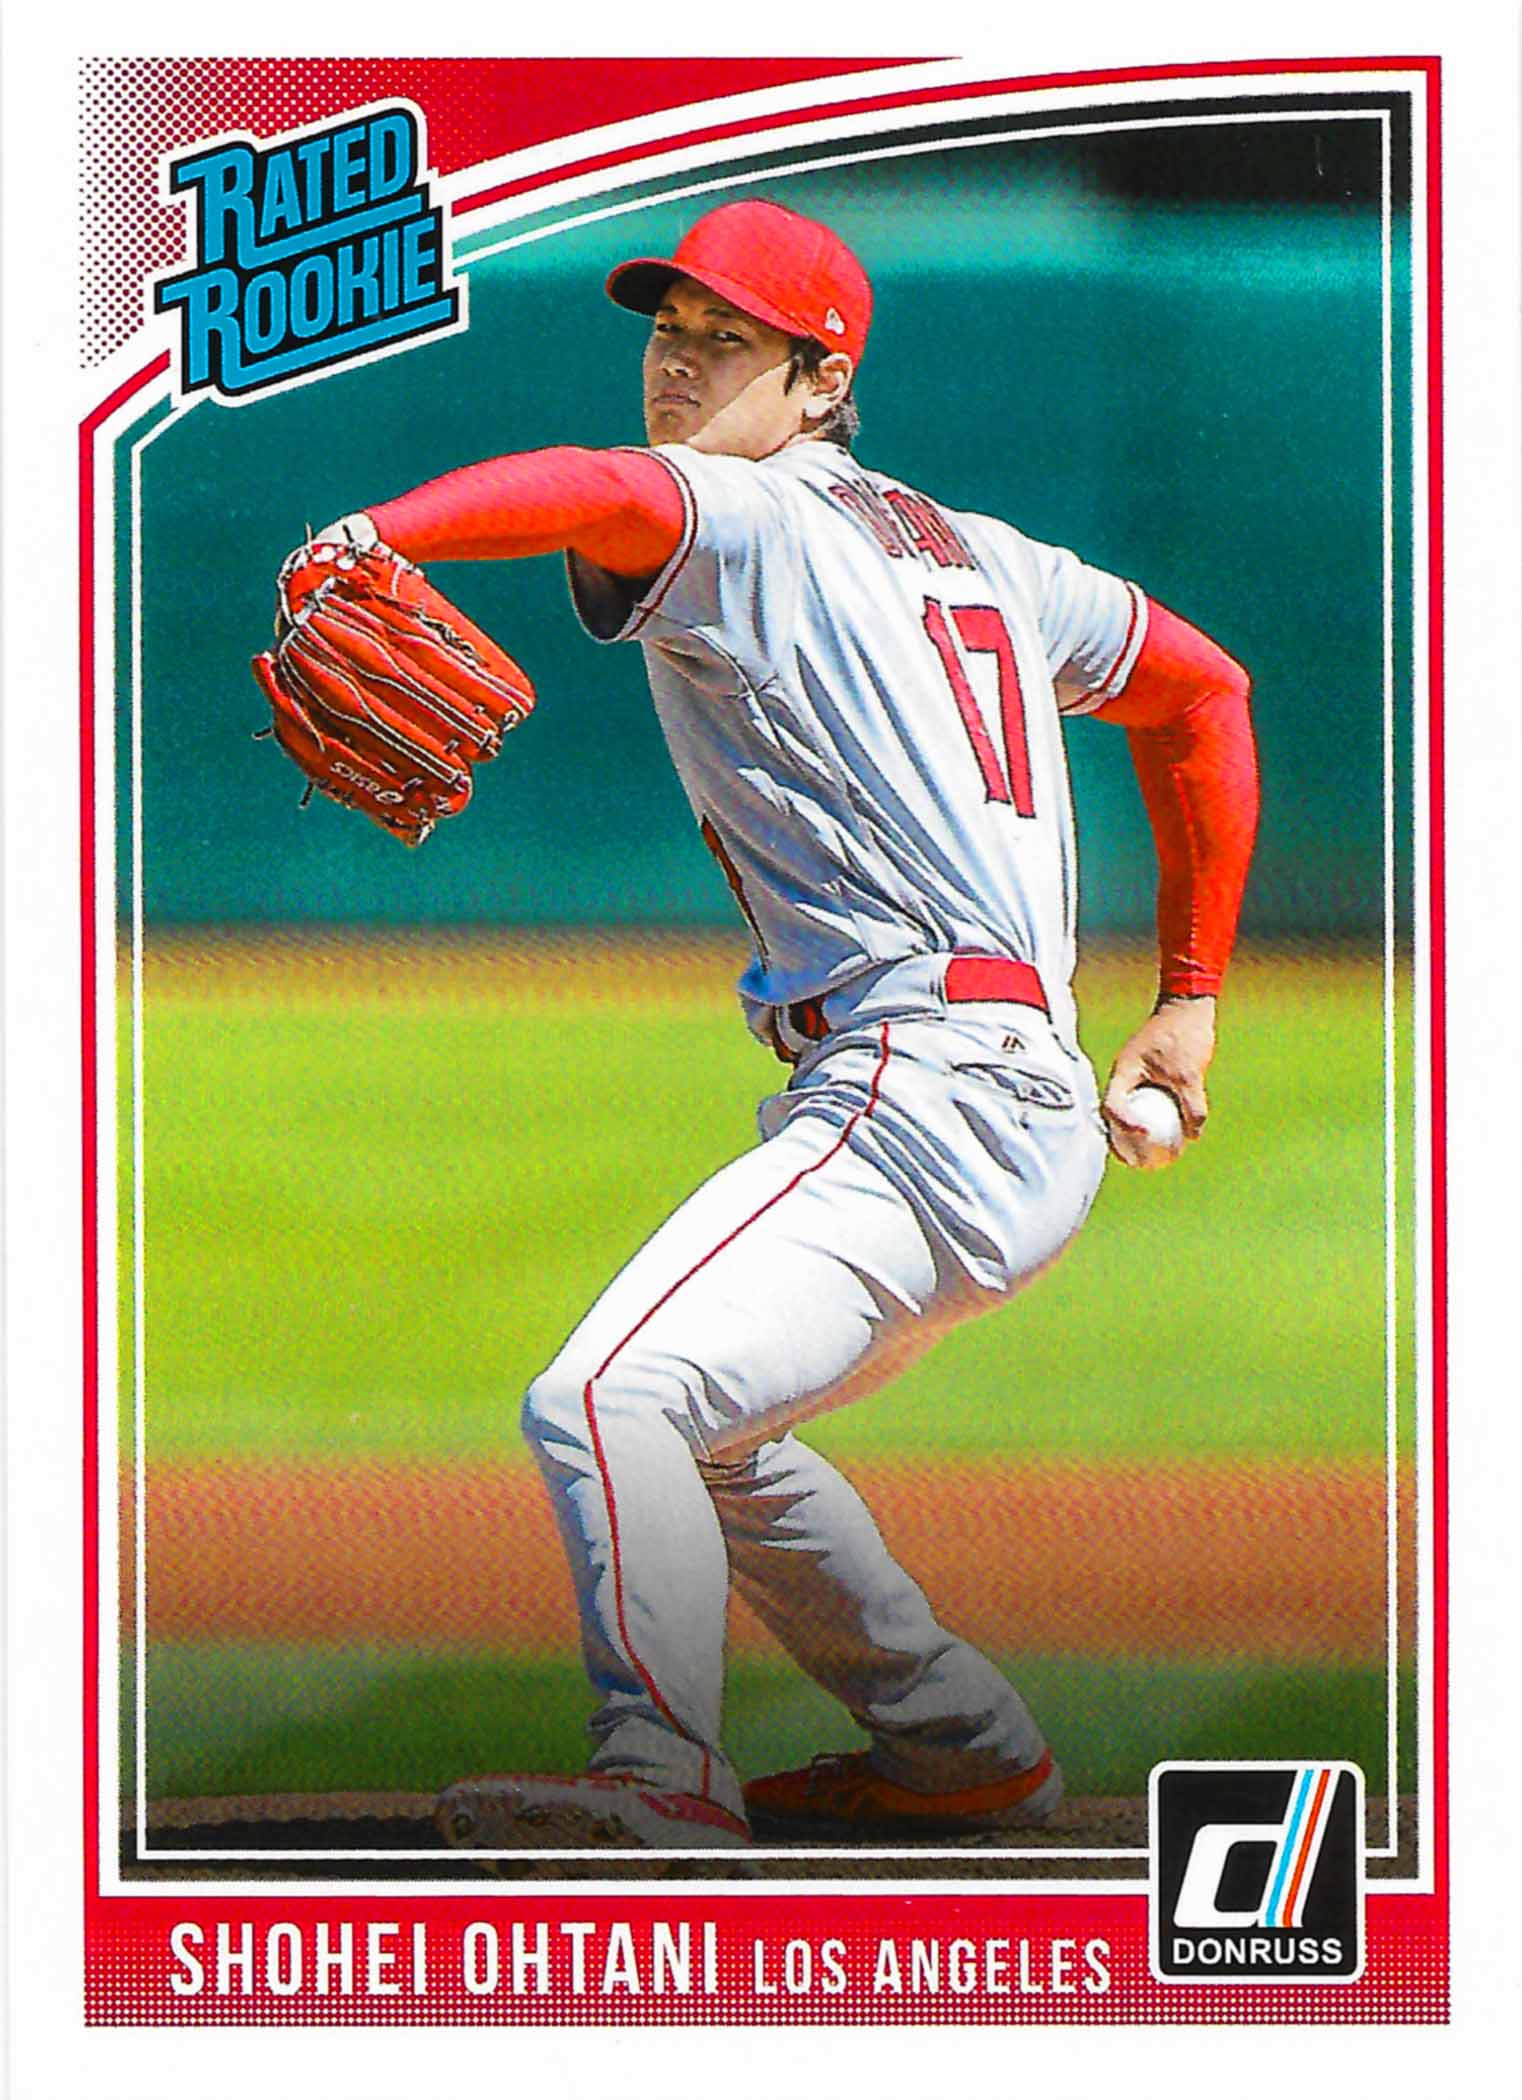 2018 Donruss Rated Rookie